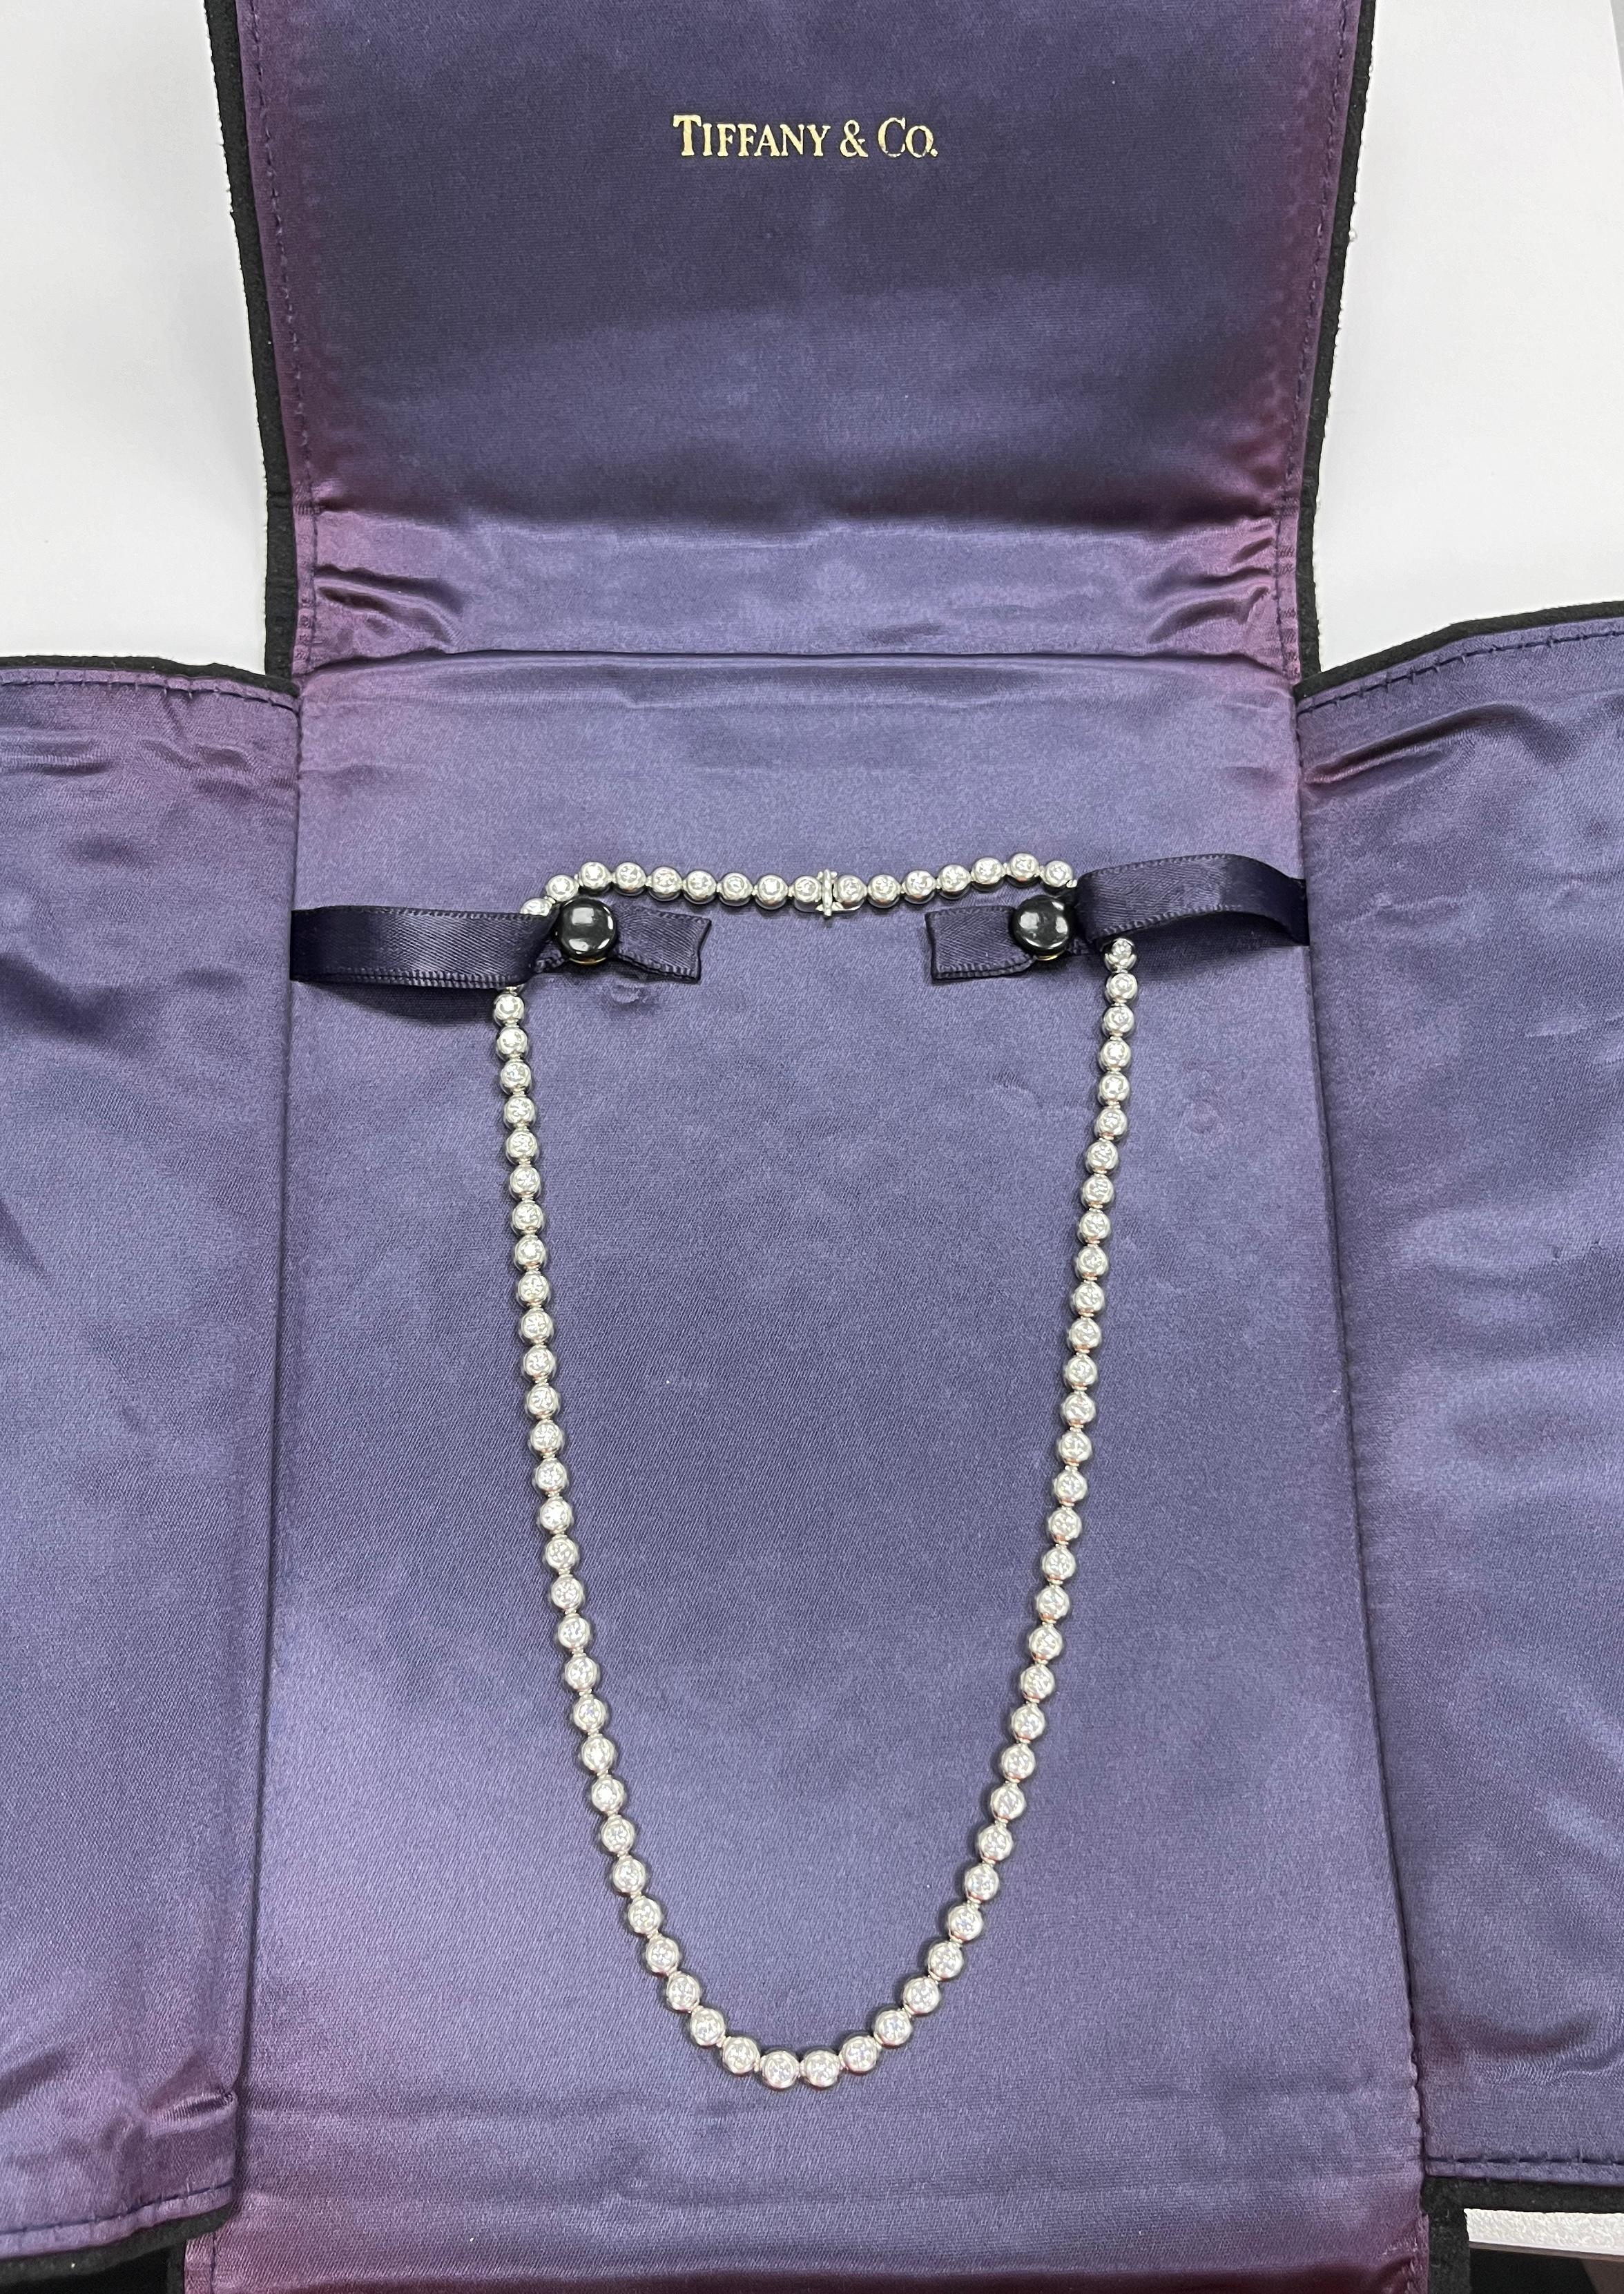 Tiffany & Co. Platinum Diamond Necklace In Excellent Condition For Sale In New York, NY